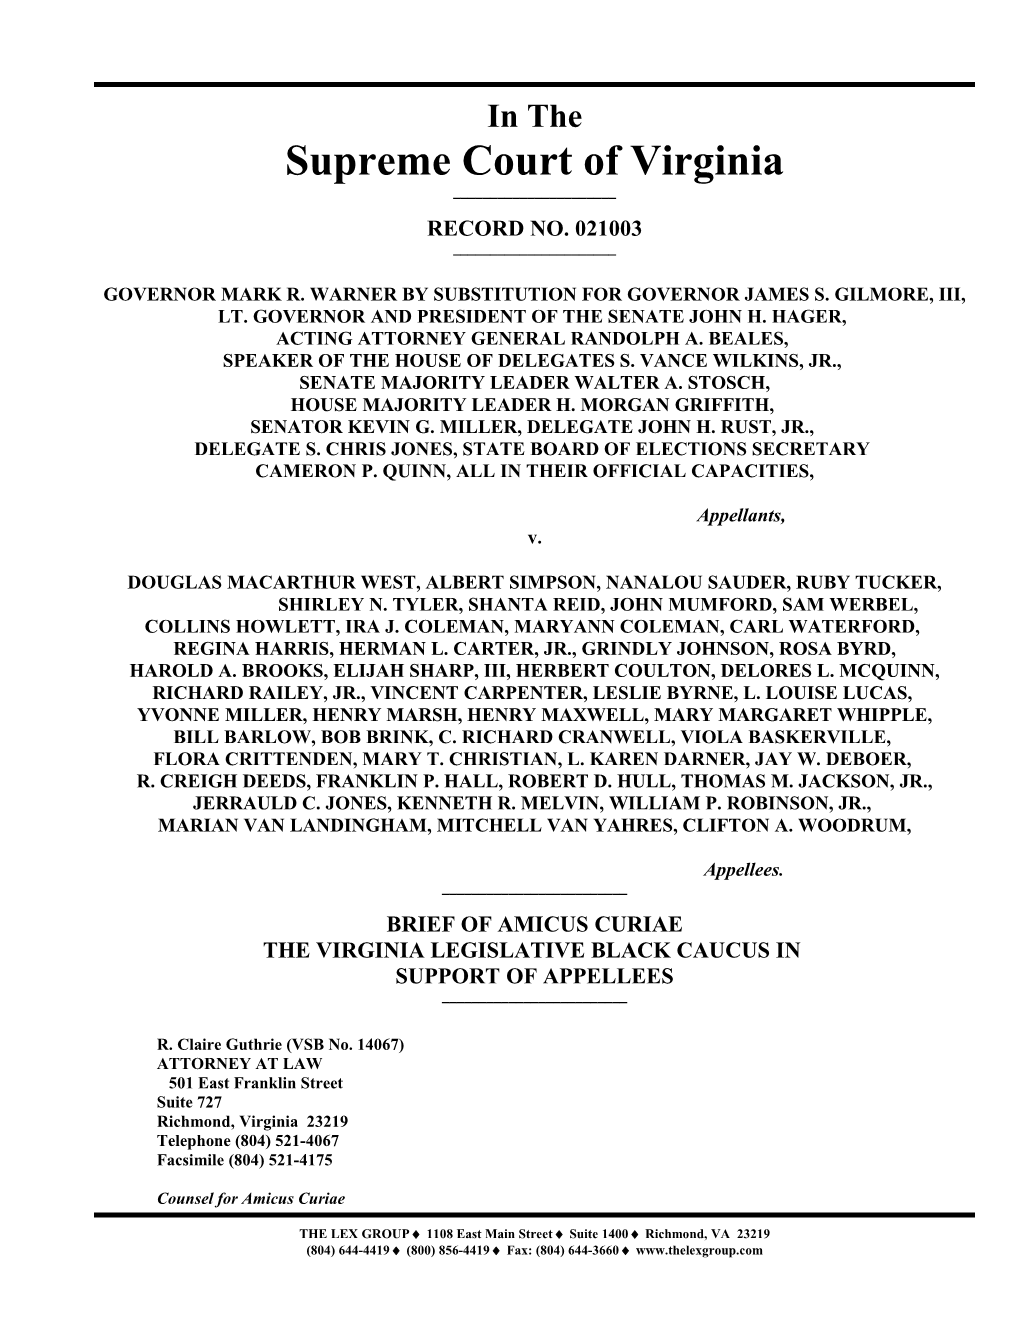 In the Supreme Court of Virginia